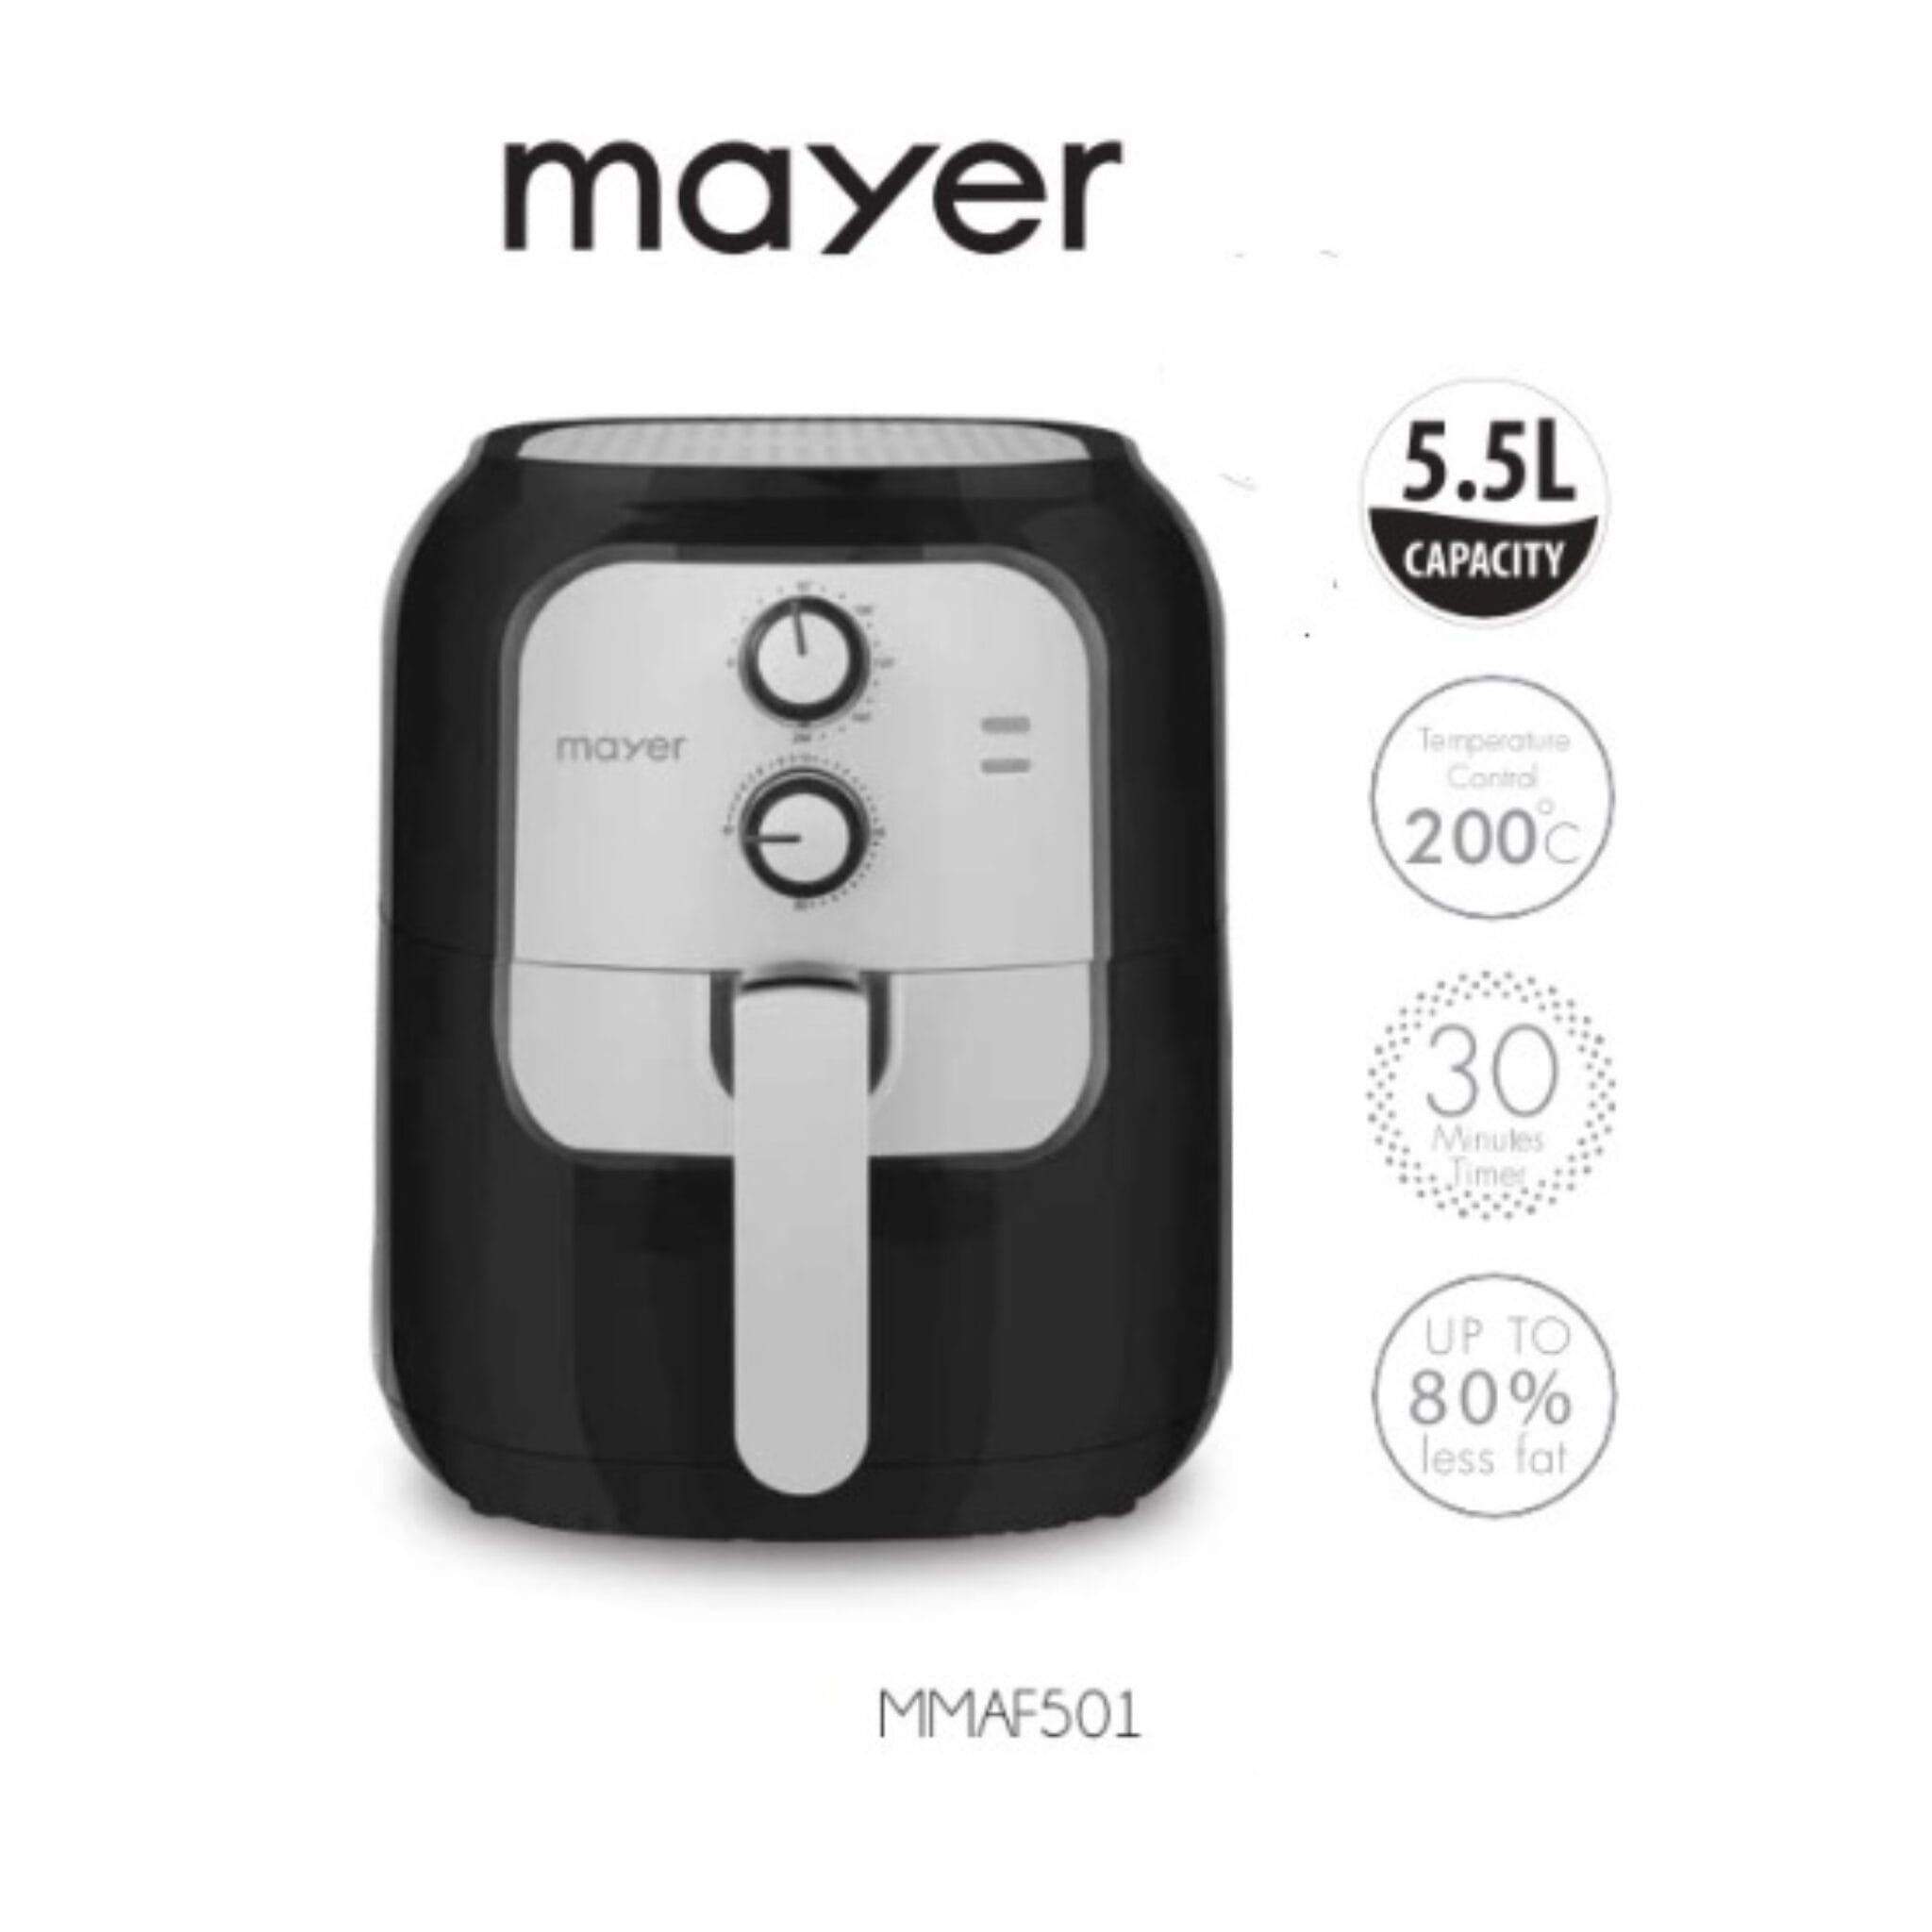 Mayer 5.5L Air Fryer (MMAF501)Temperature Up To 200 Degree 30 Minutes